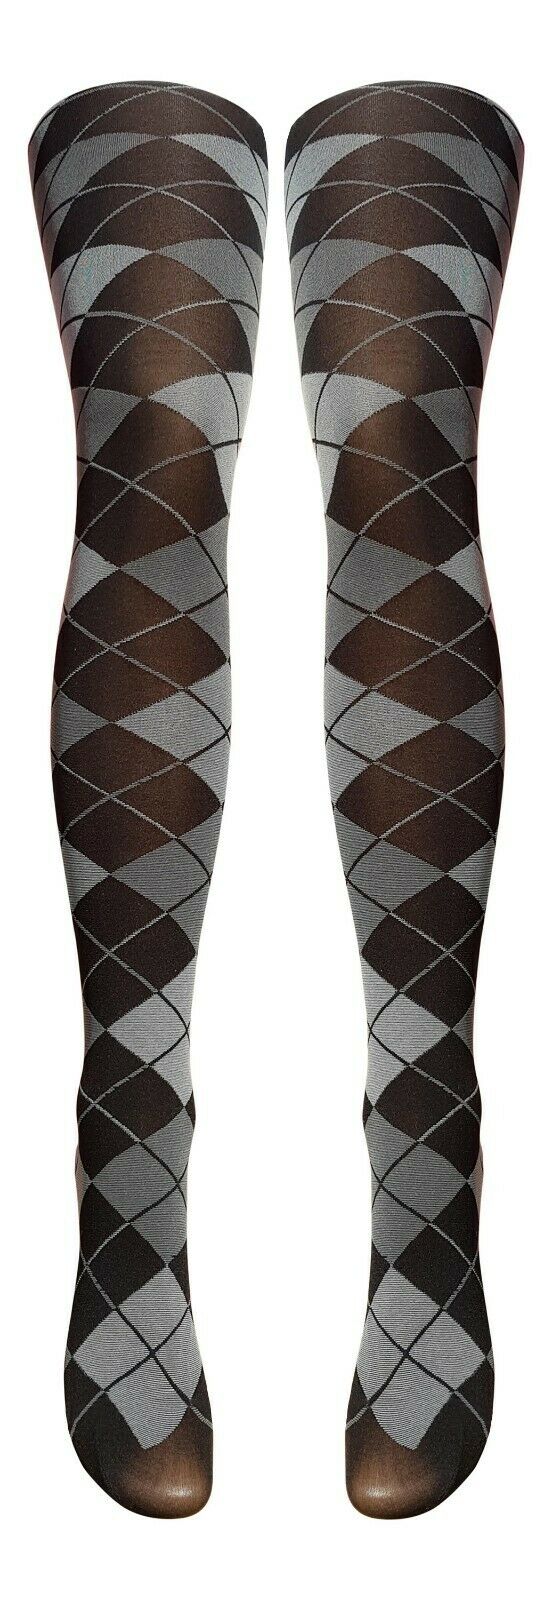 Scottish Argyle / Tartan Print Tights Available In 3 Styles (Made In Italy)